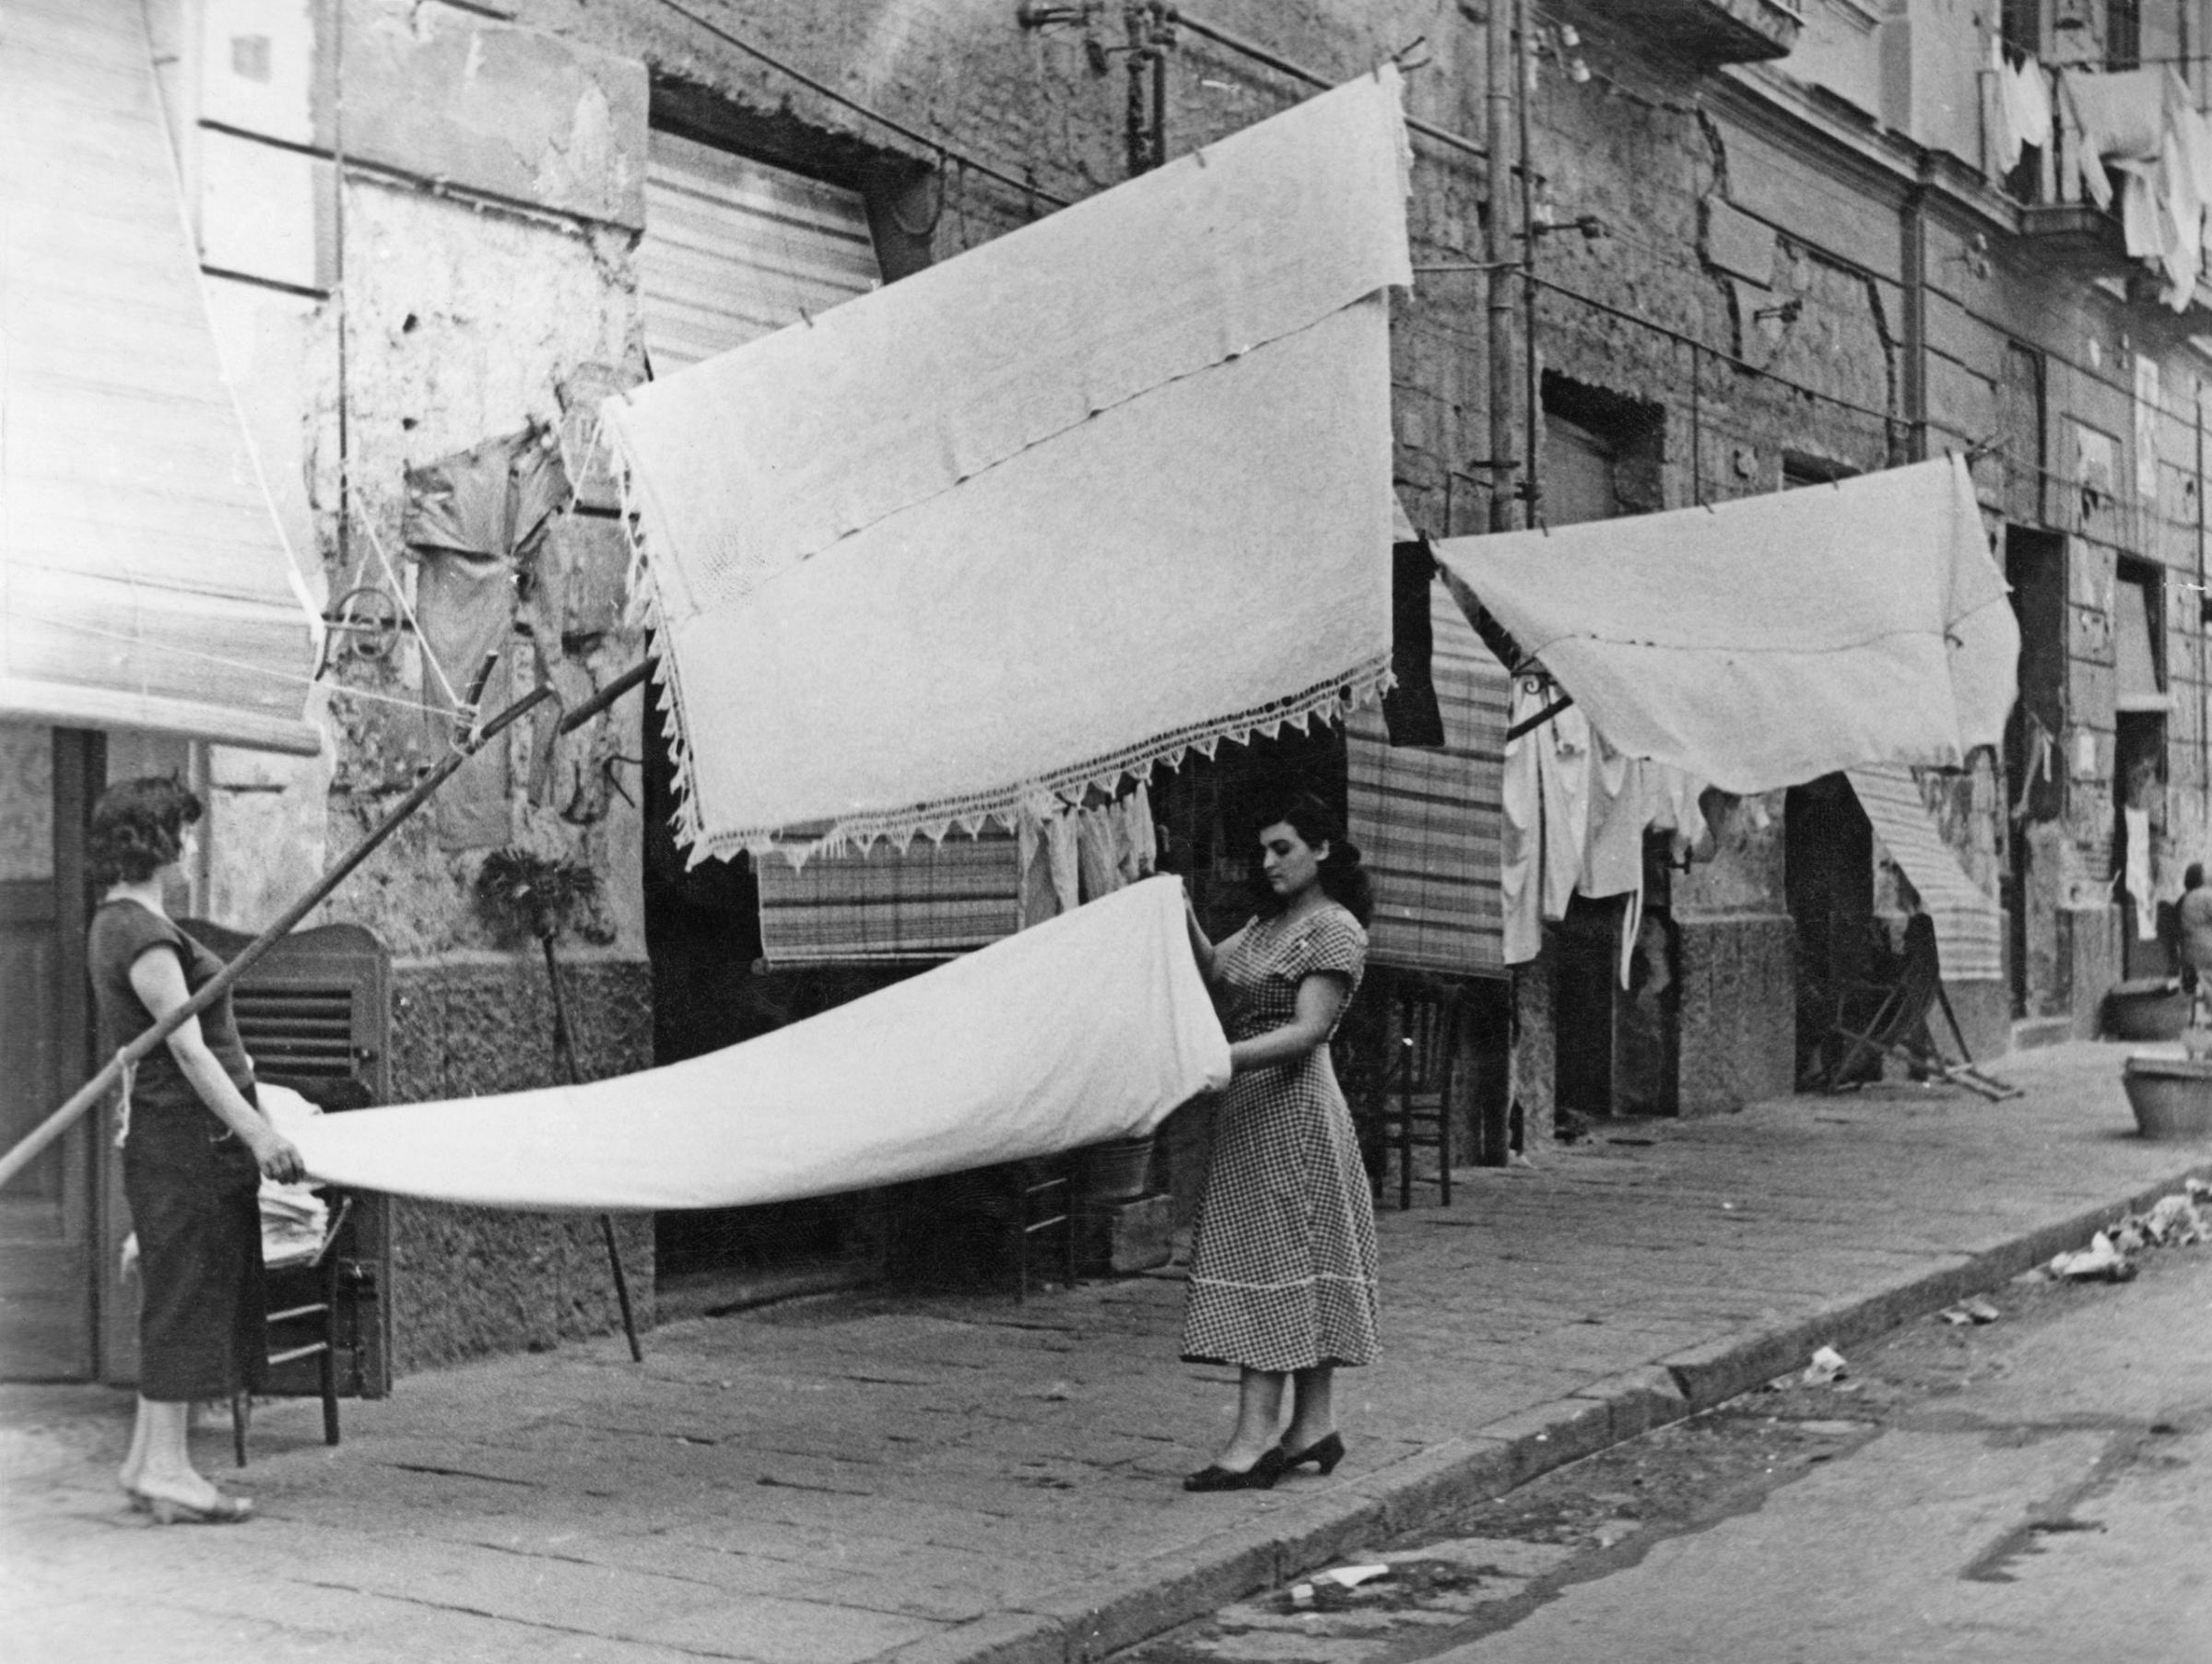 Friday is Wash Day for the people of Naples, Italy, July 1956.